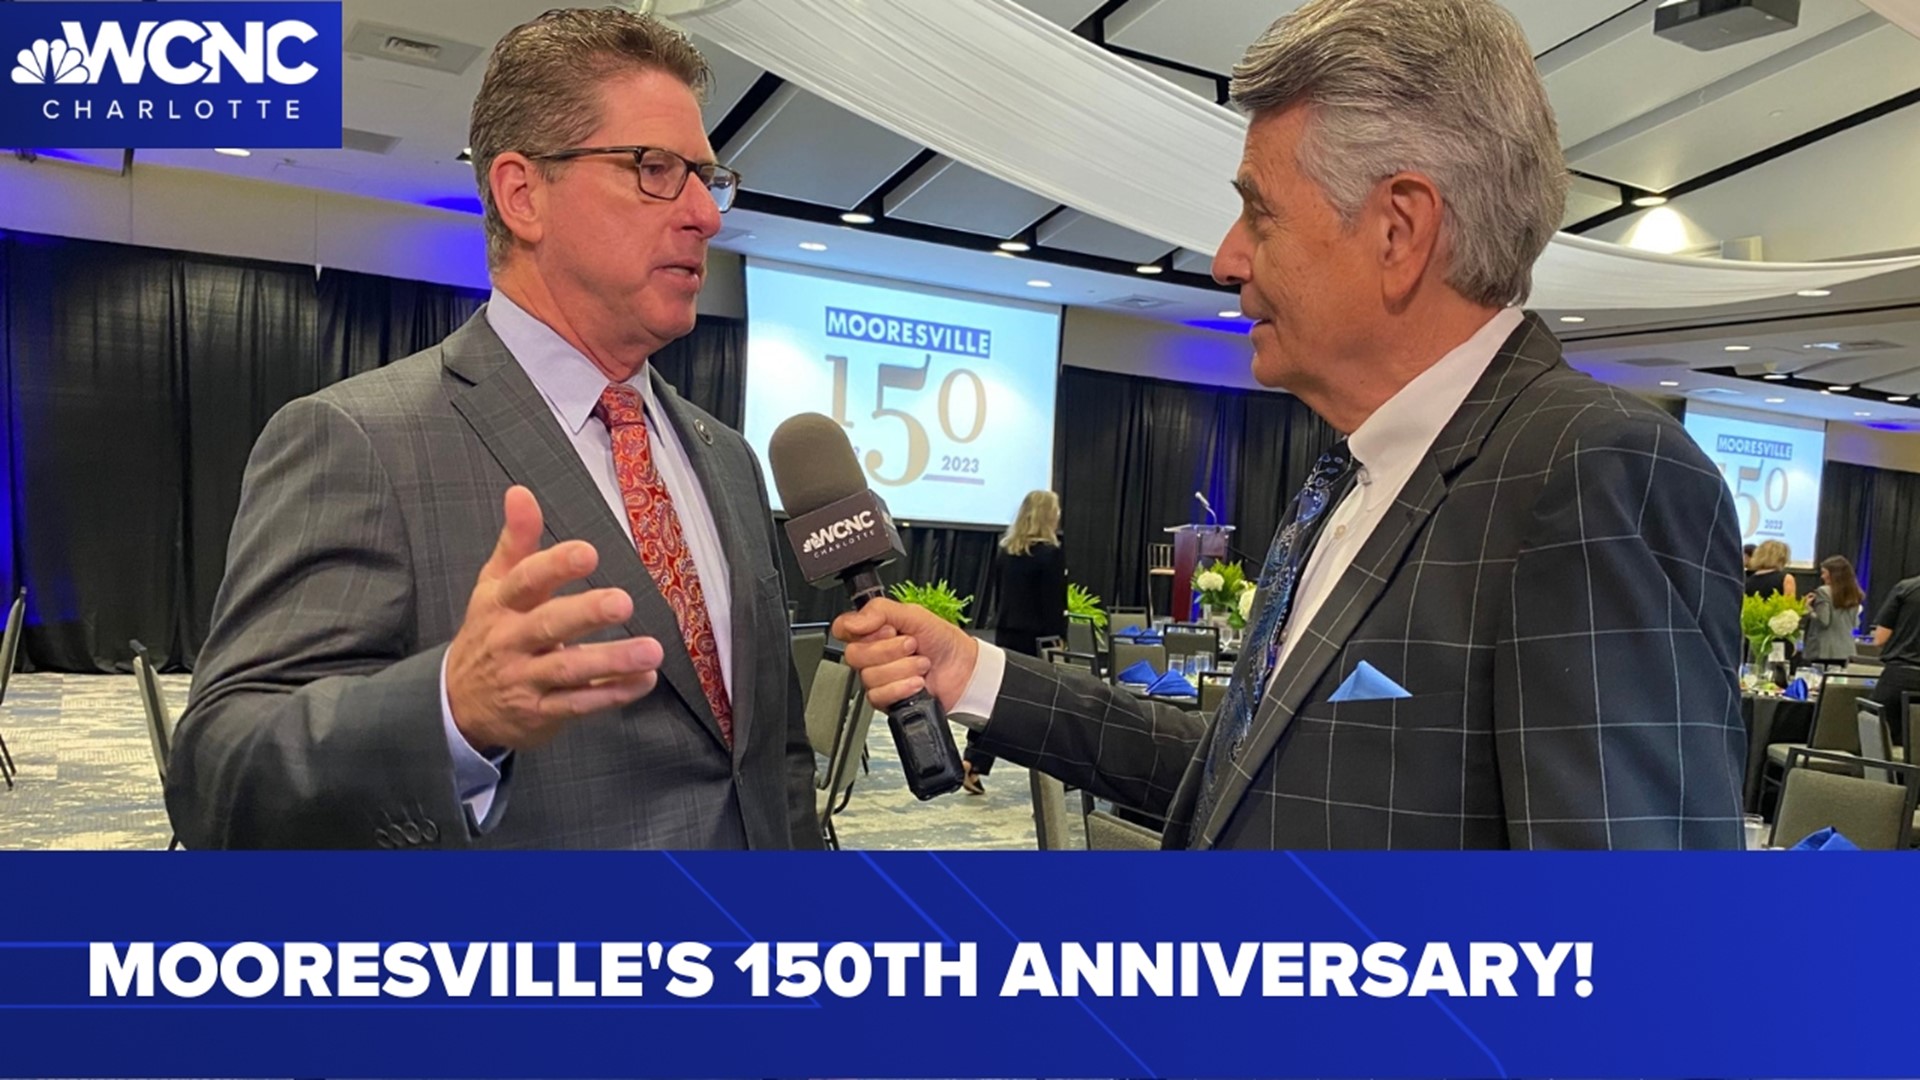 The town of Mooresville unveiled its plan for its 150th-anniversary celebrations!